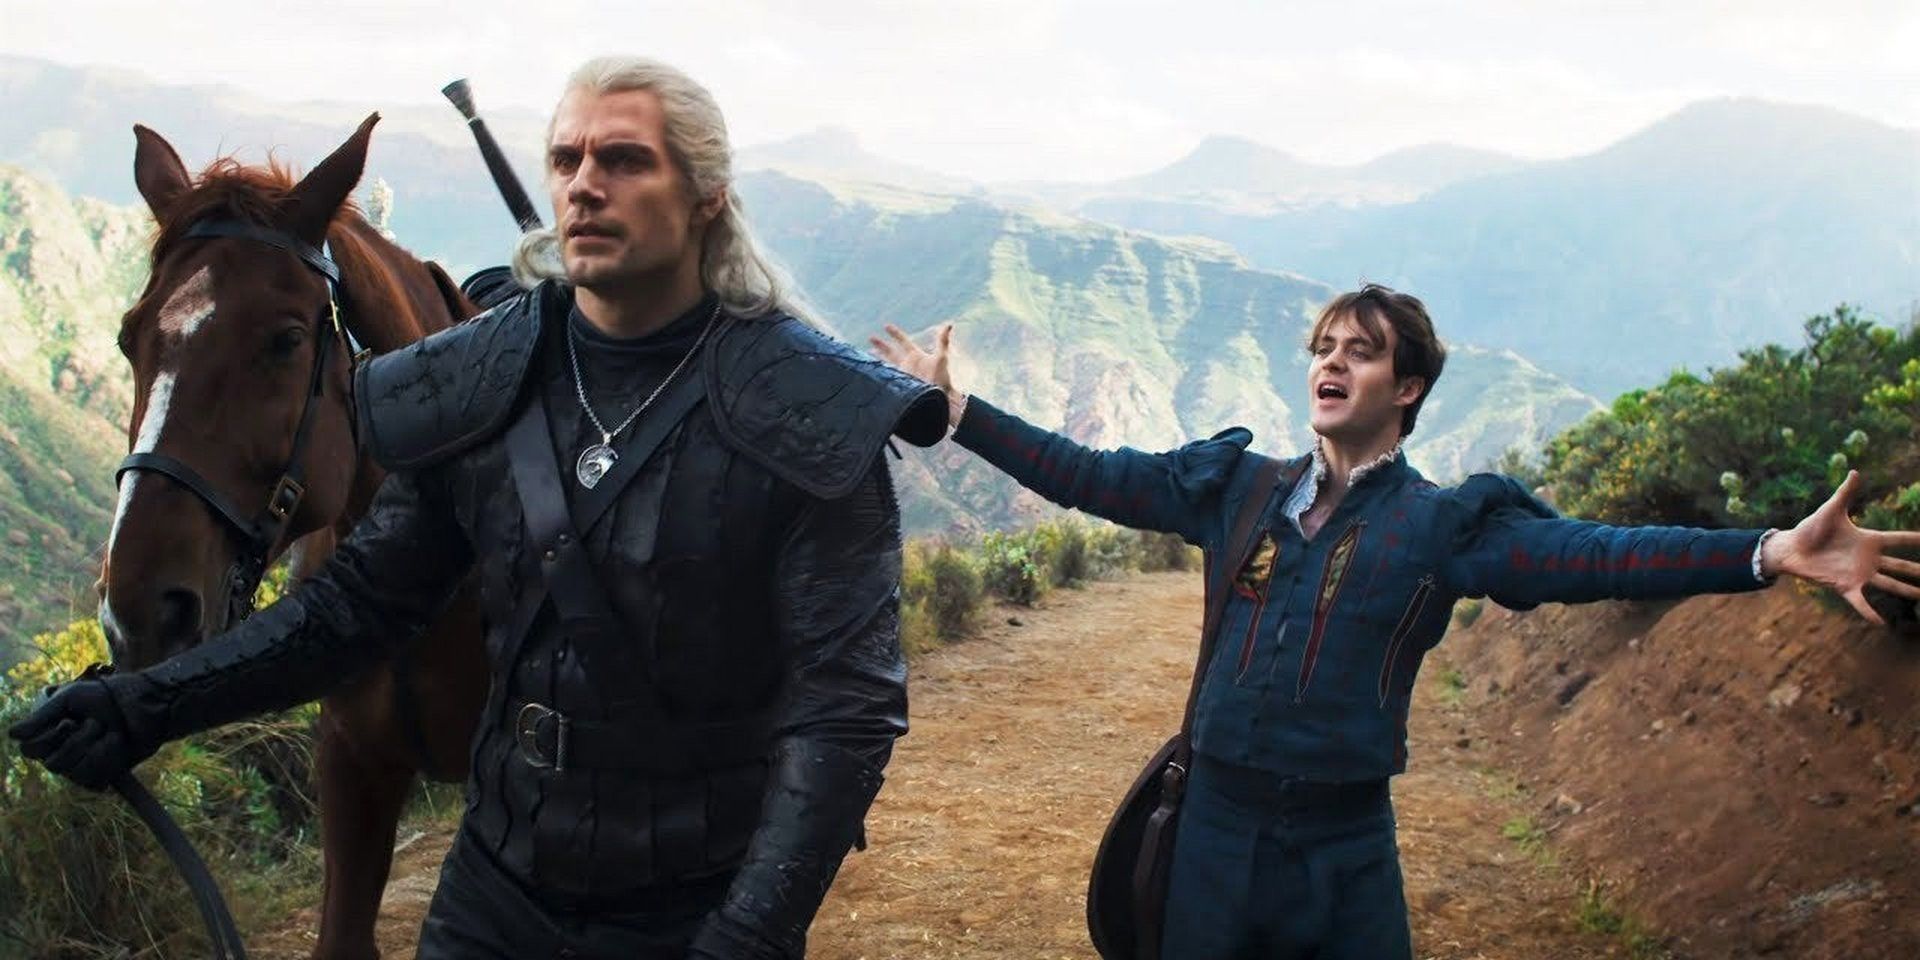 Henry-Cavill-as-Geralt-and-Joey-Batey-as-Jaskier-in-The-Witcher.jpg